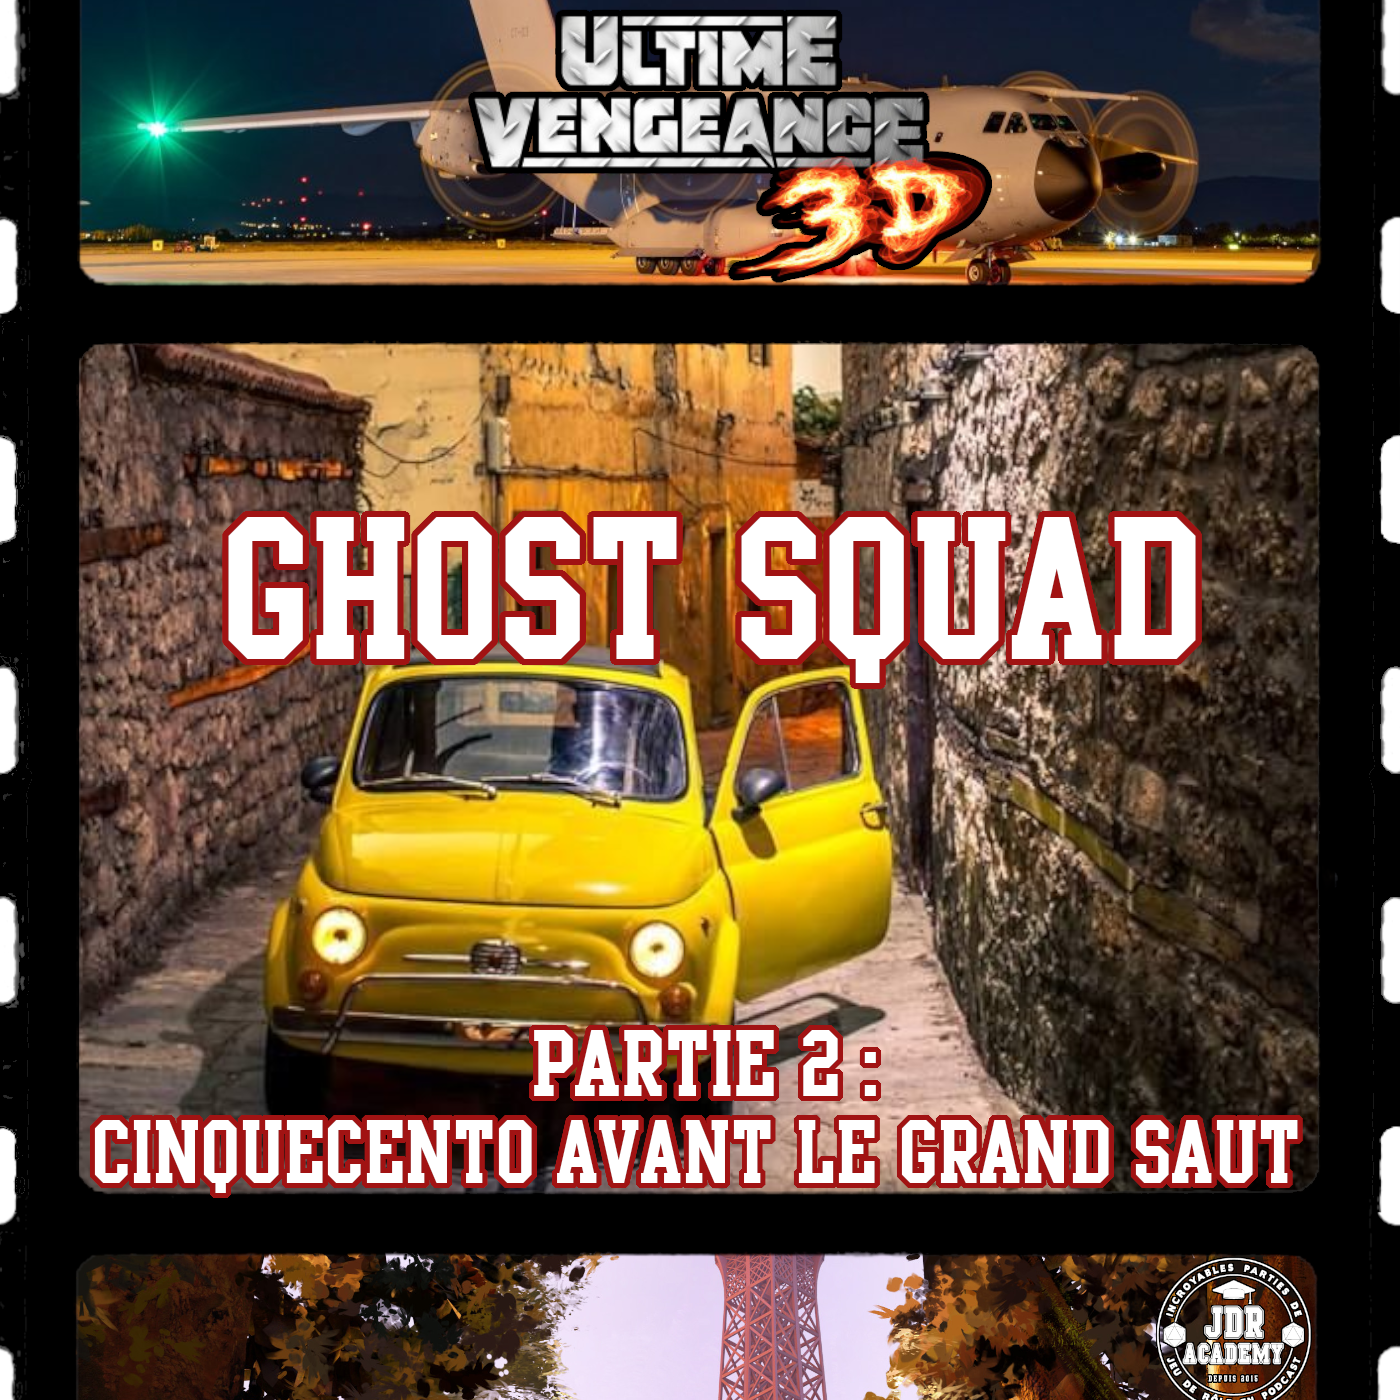 ULTIME VENGEANCE 3D – Ghost Squad (2/2)